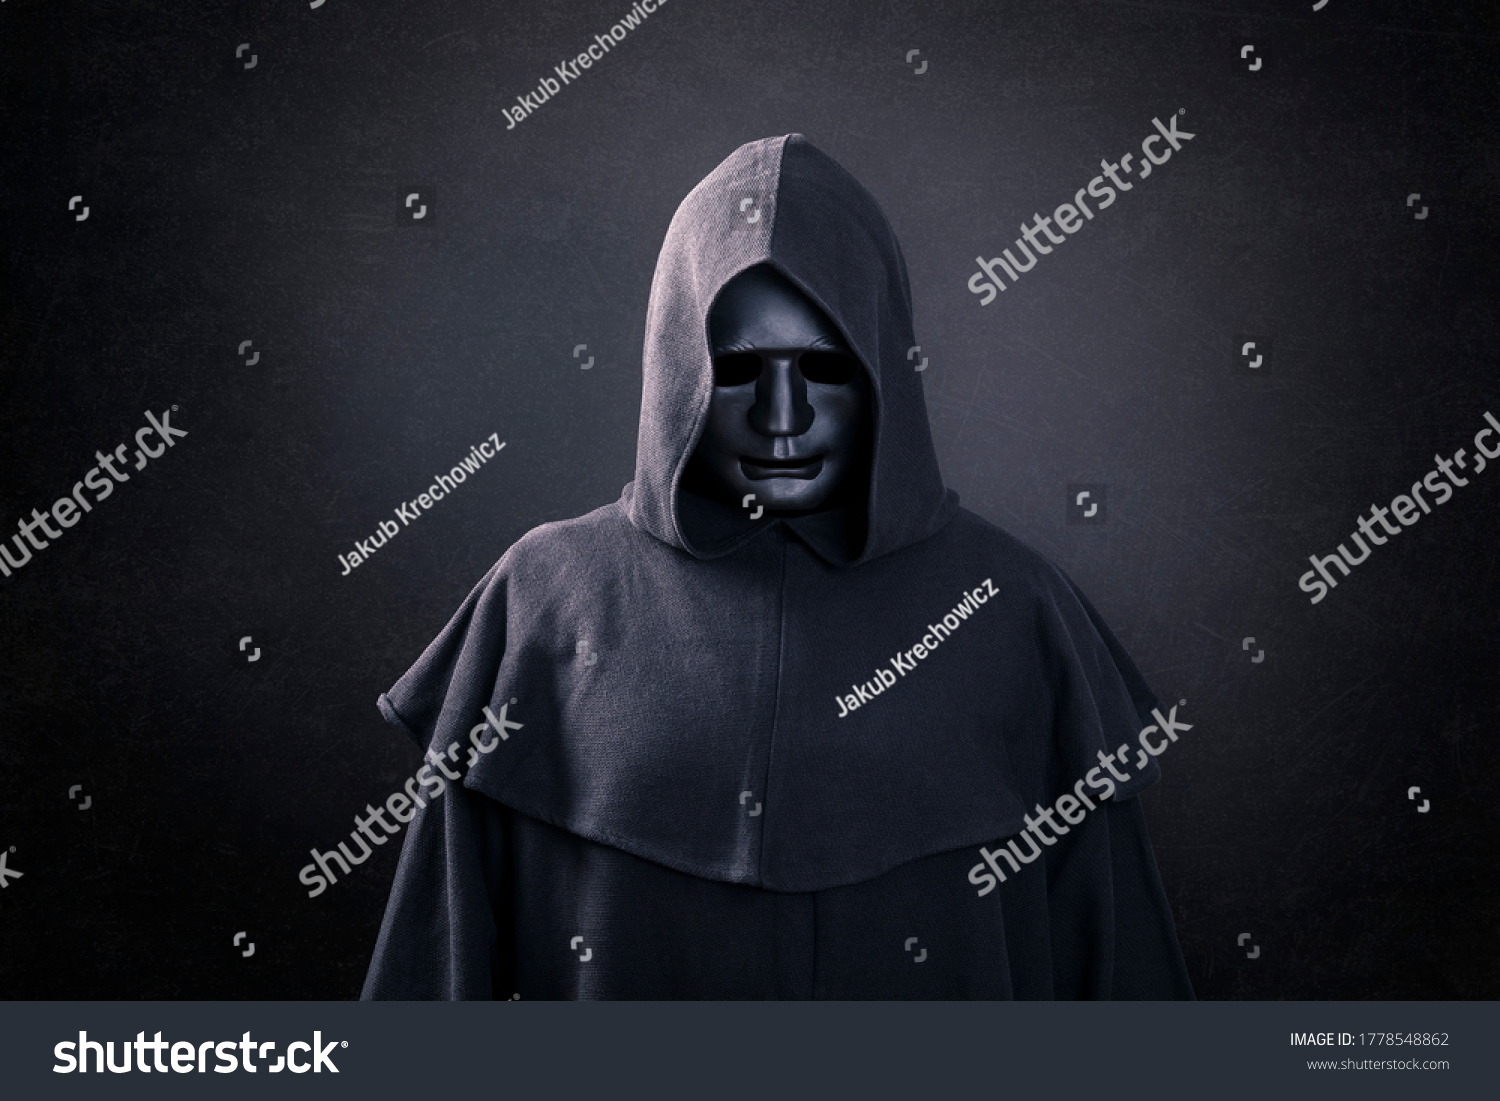 Scary figure with mask in hooded cloak in the dark #1778548862